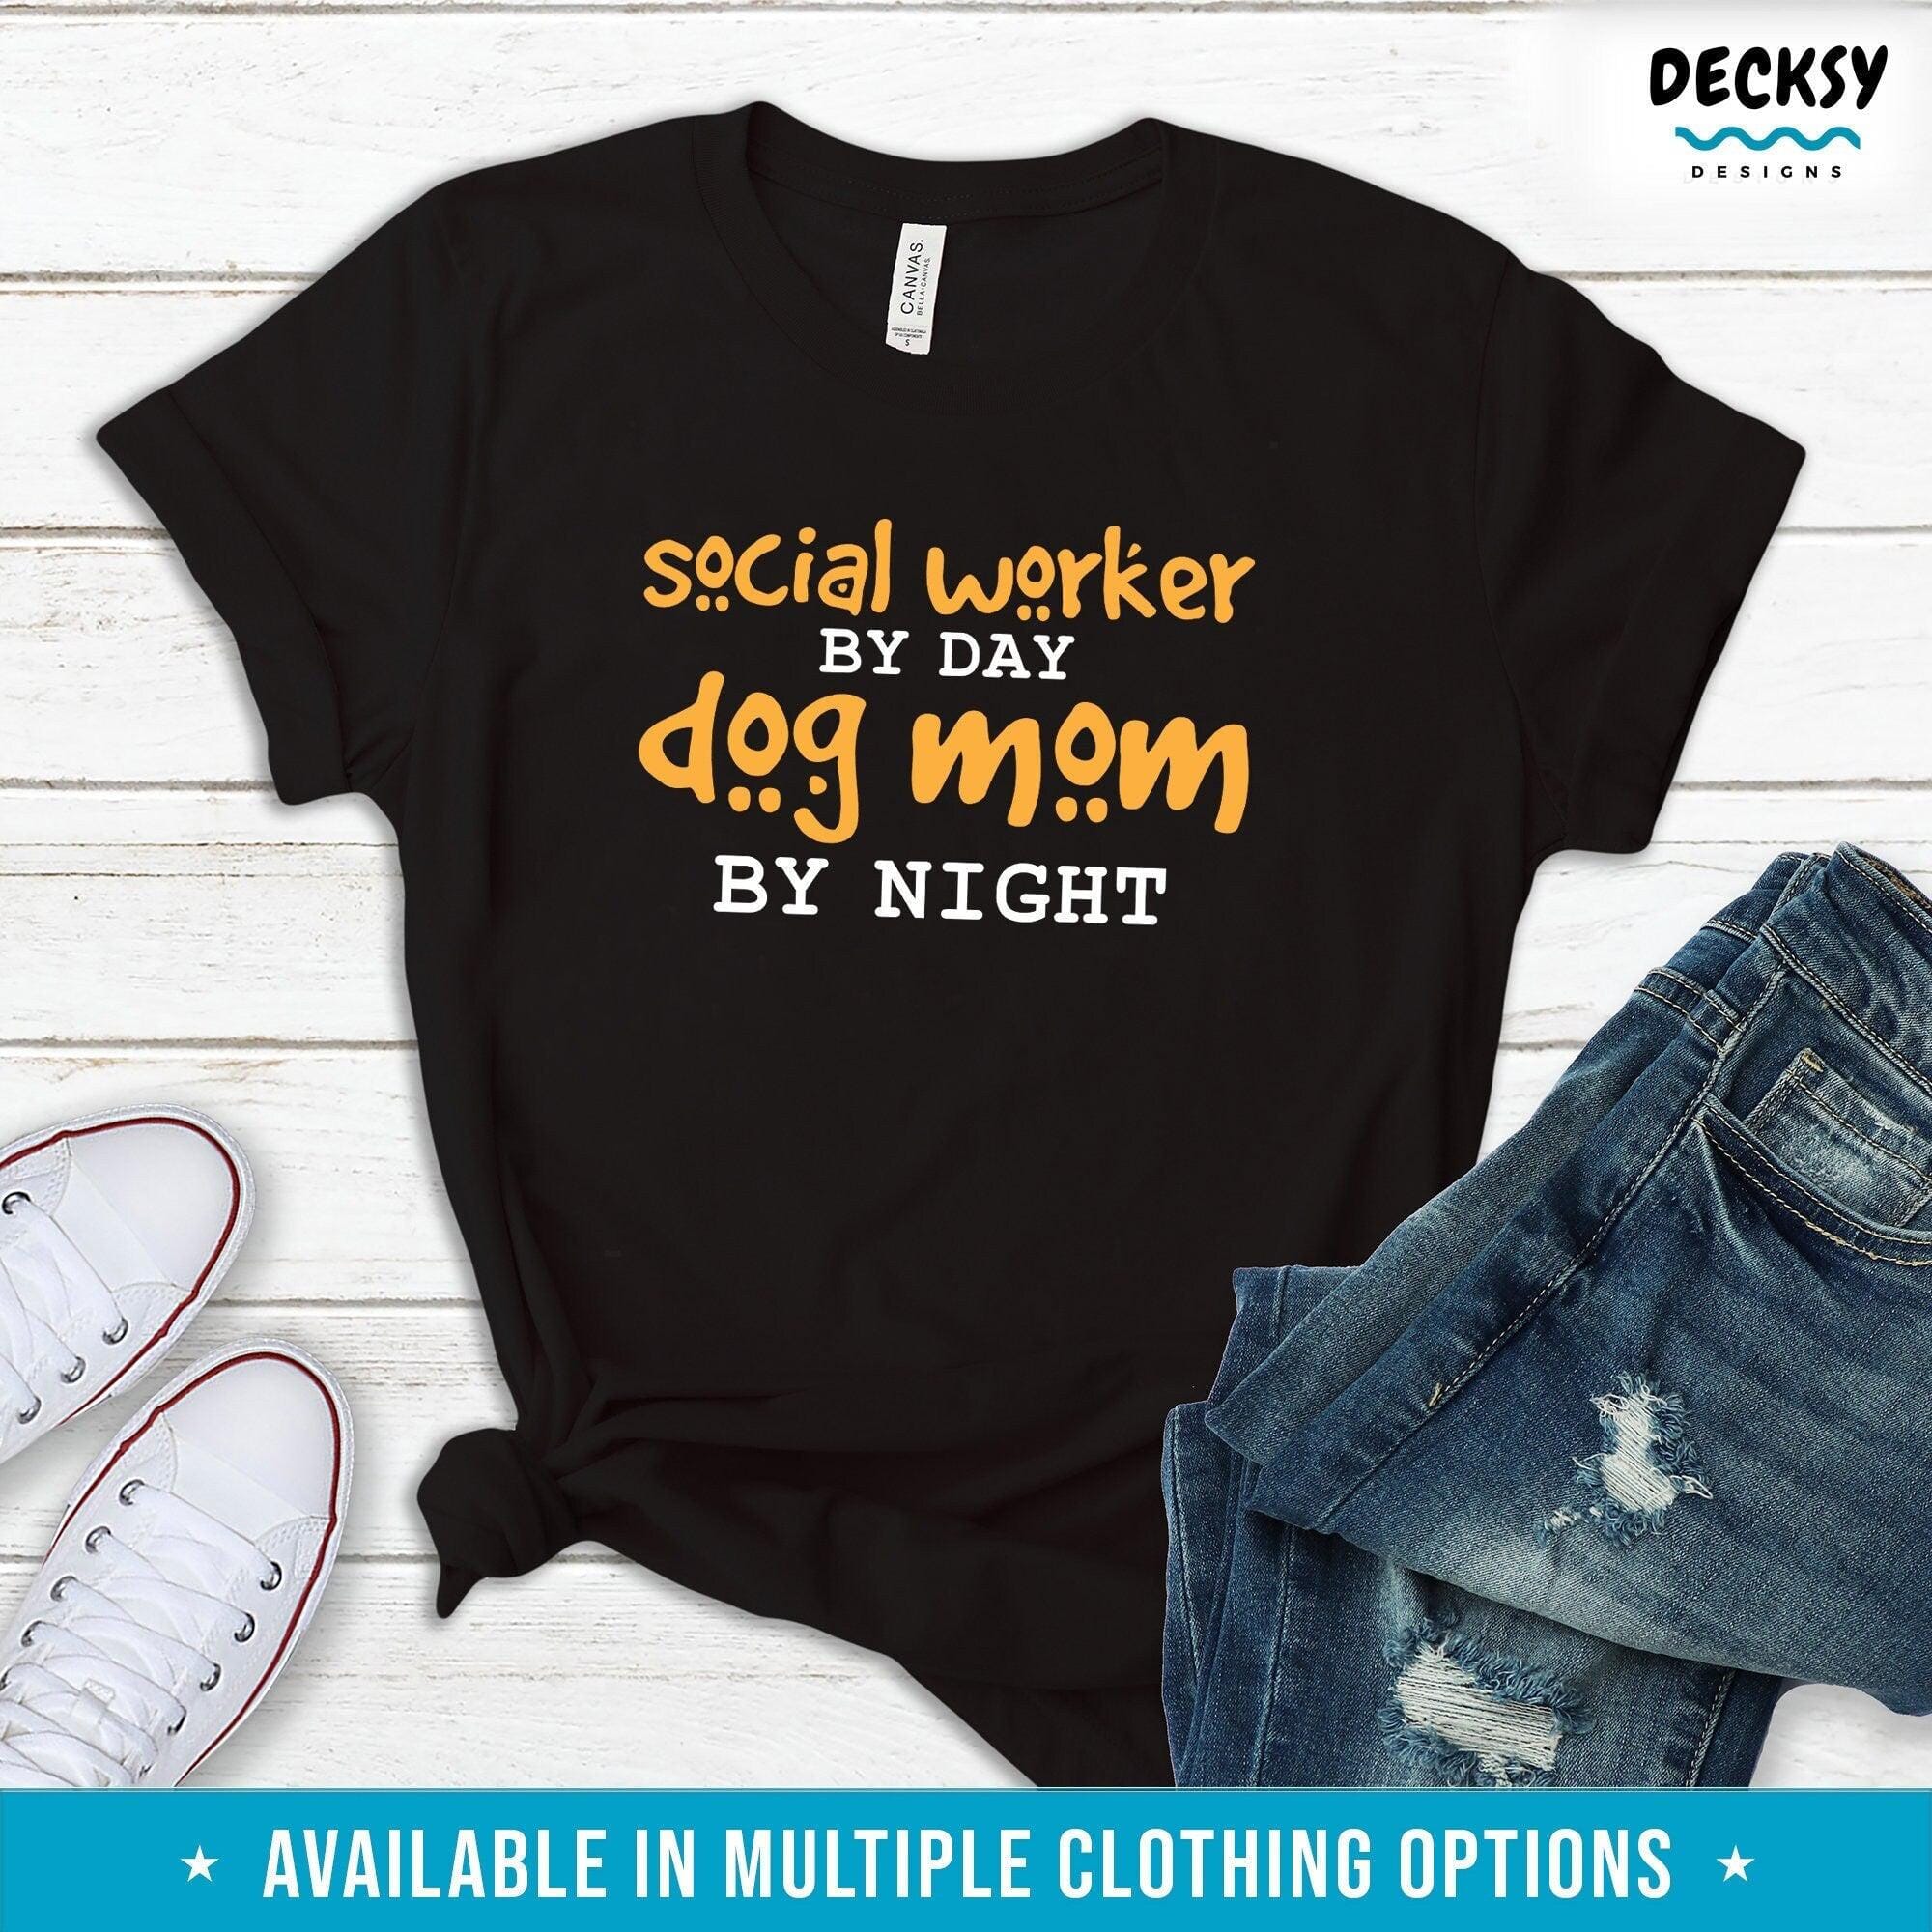 Social Worker Dog Mom Shirt, Funny Social Worker Gift-Clothing:Gender-Neutral Adult Clothing:Tops & Tees:T-shirts:Graphic Tees-DecksyDesigns